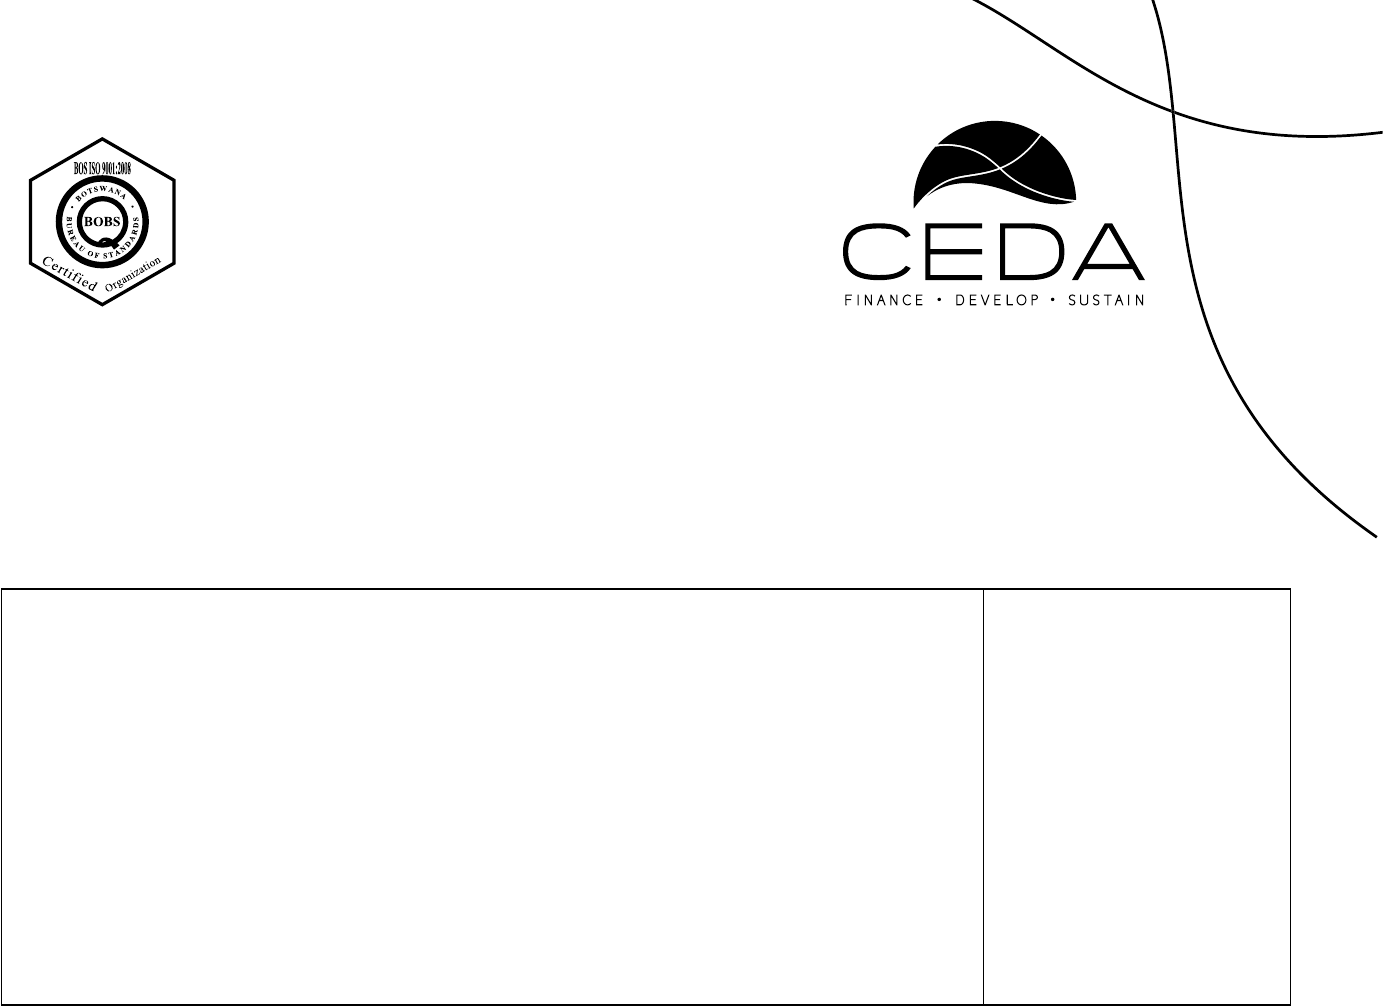 ceda business plan guidelines